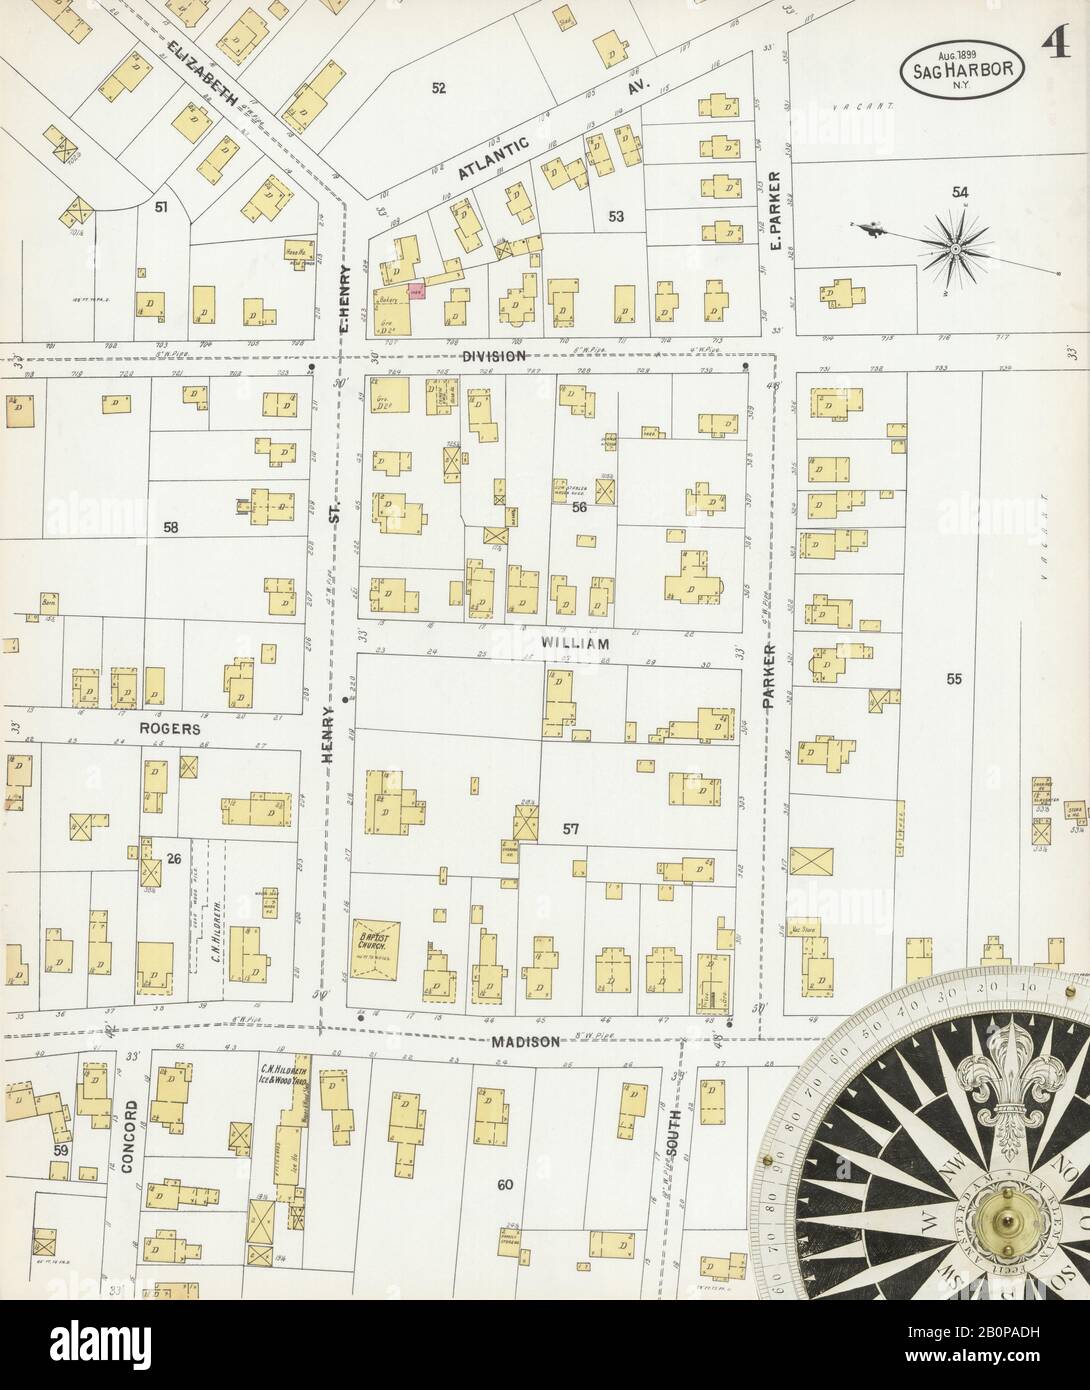 Image 4 of Sanborn Fire Insurance Map from Sag Harbor, Suffolk County, New York. Aug 1899. 4 Sheet(s), America, street map with a Nineteenth Century compass Stock Photo